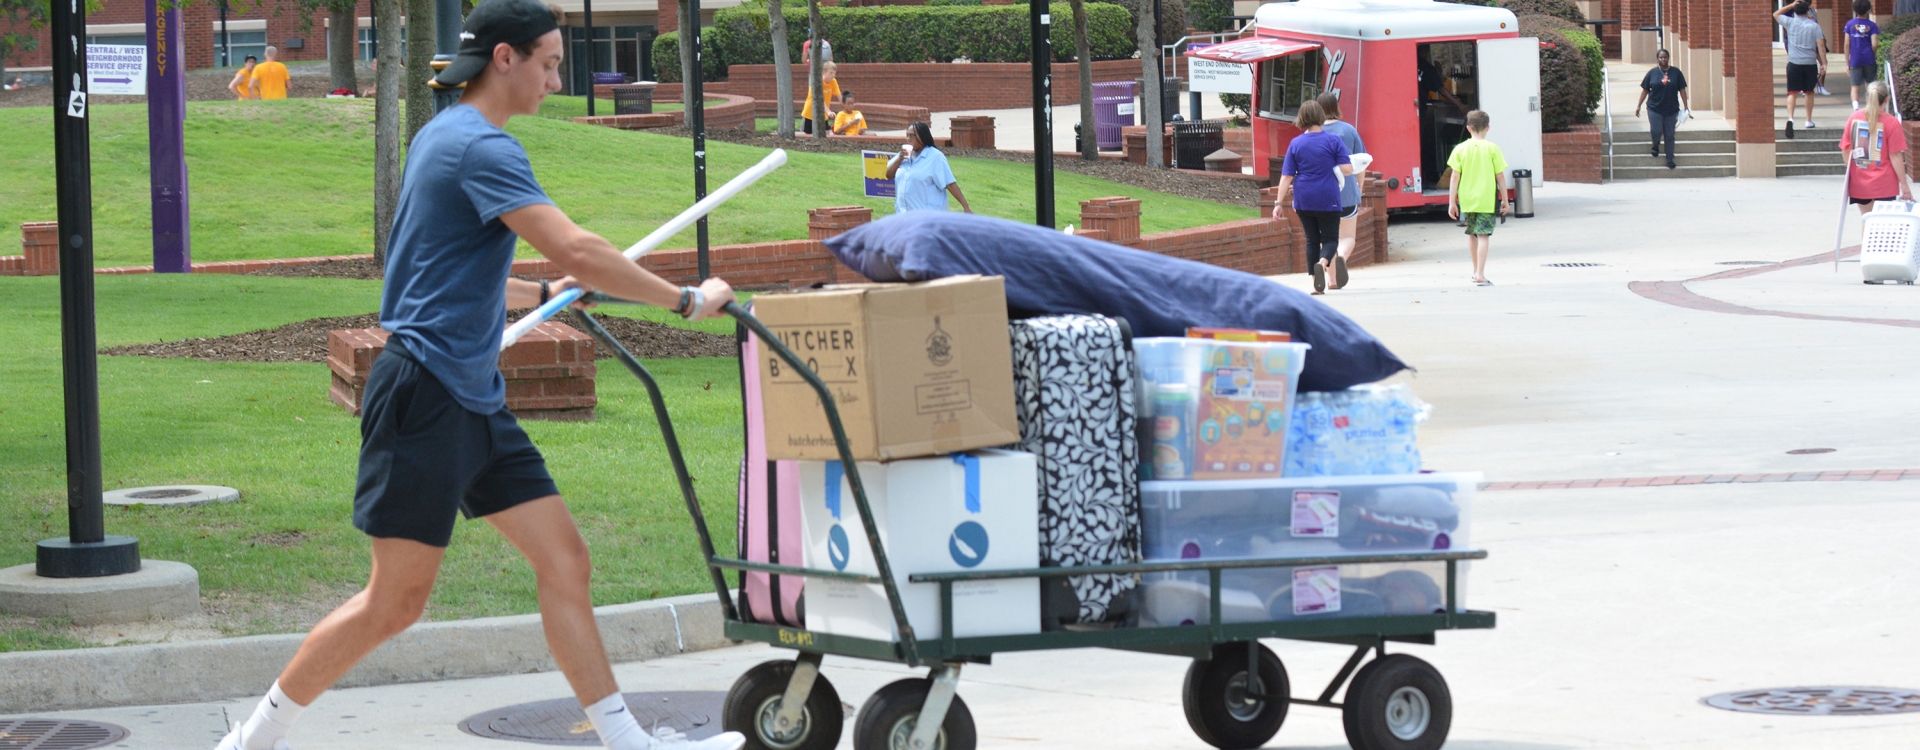 Drop Off and Move In Schedule 2021 The ECU Parent and Family Portal